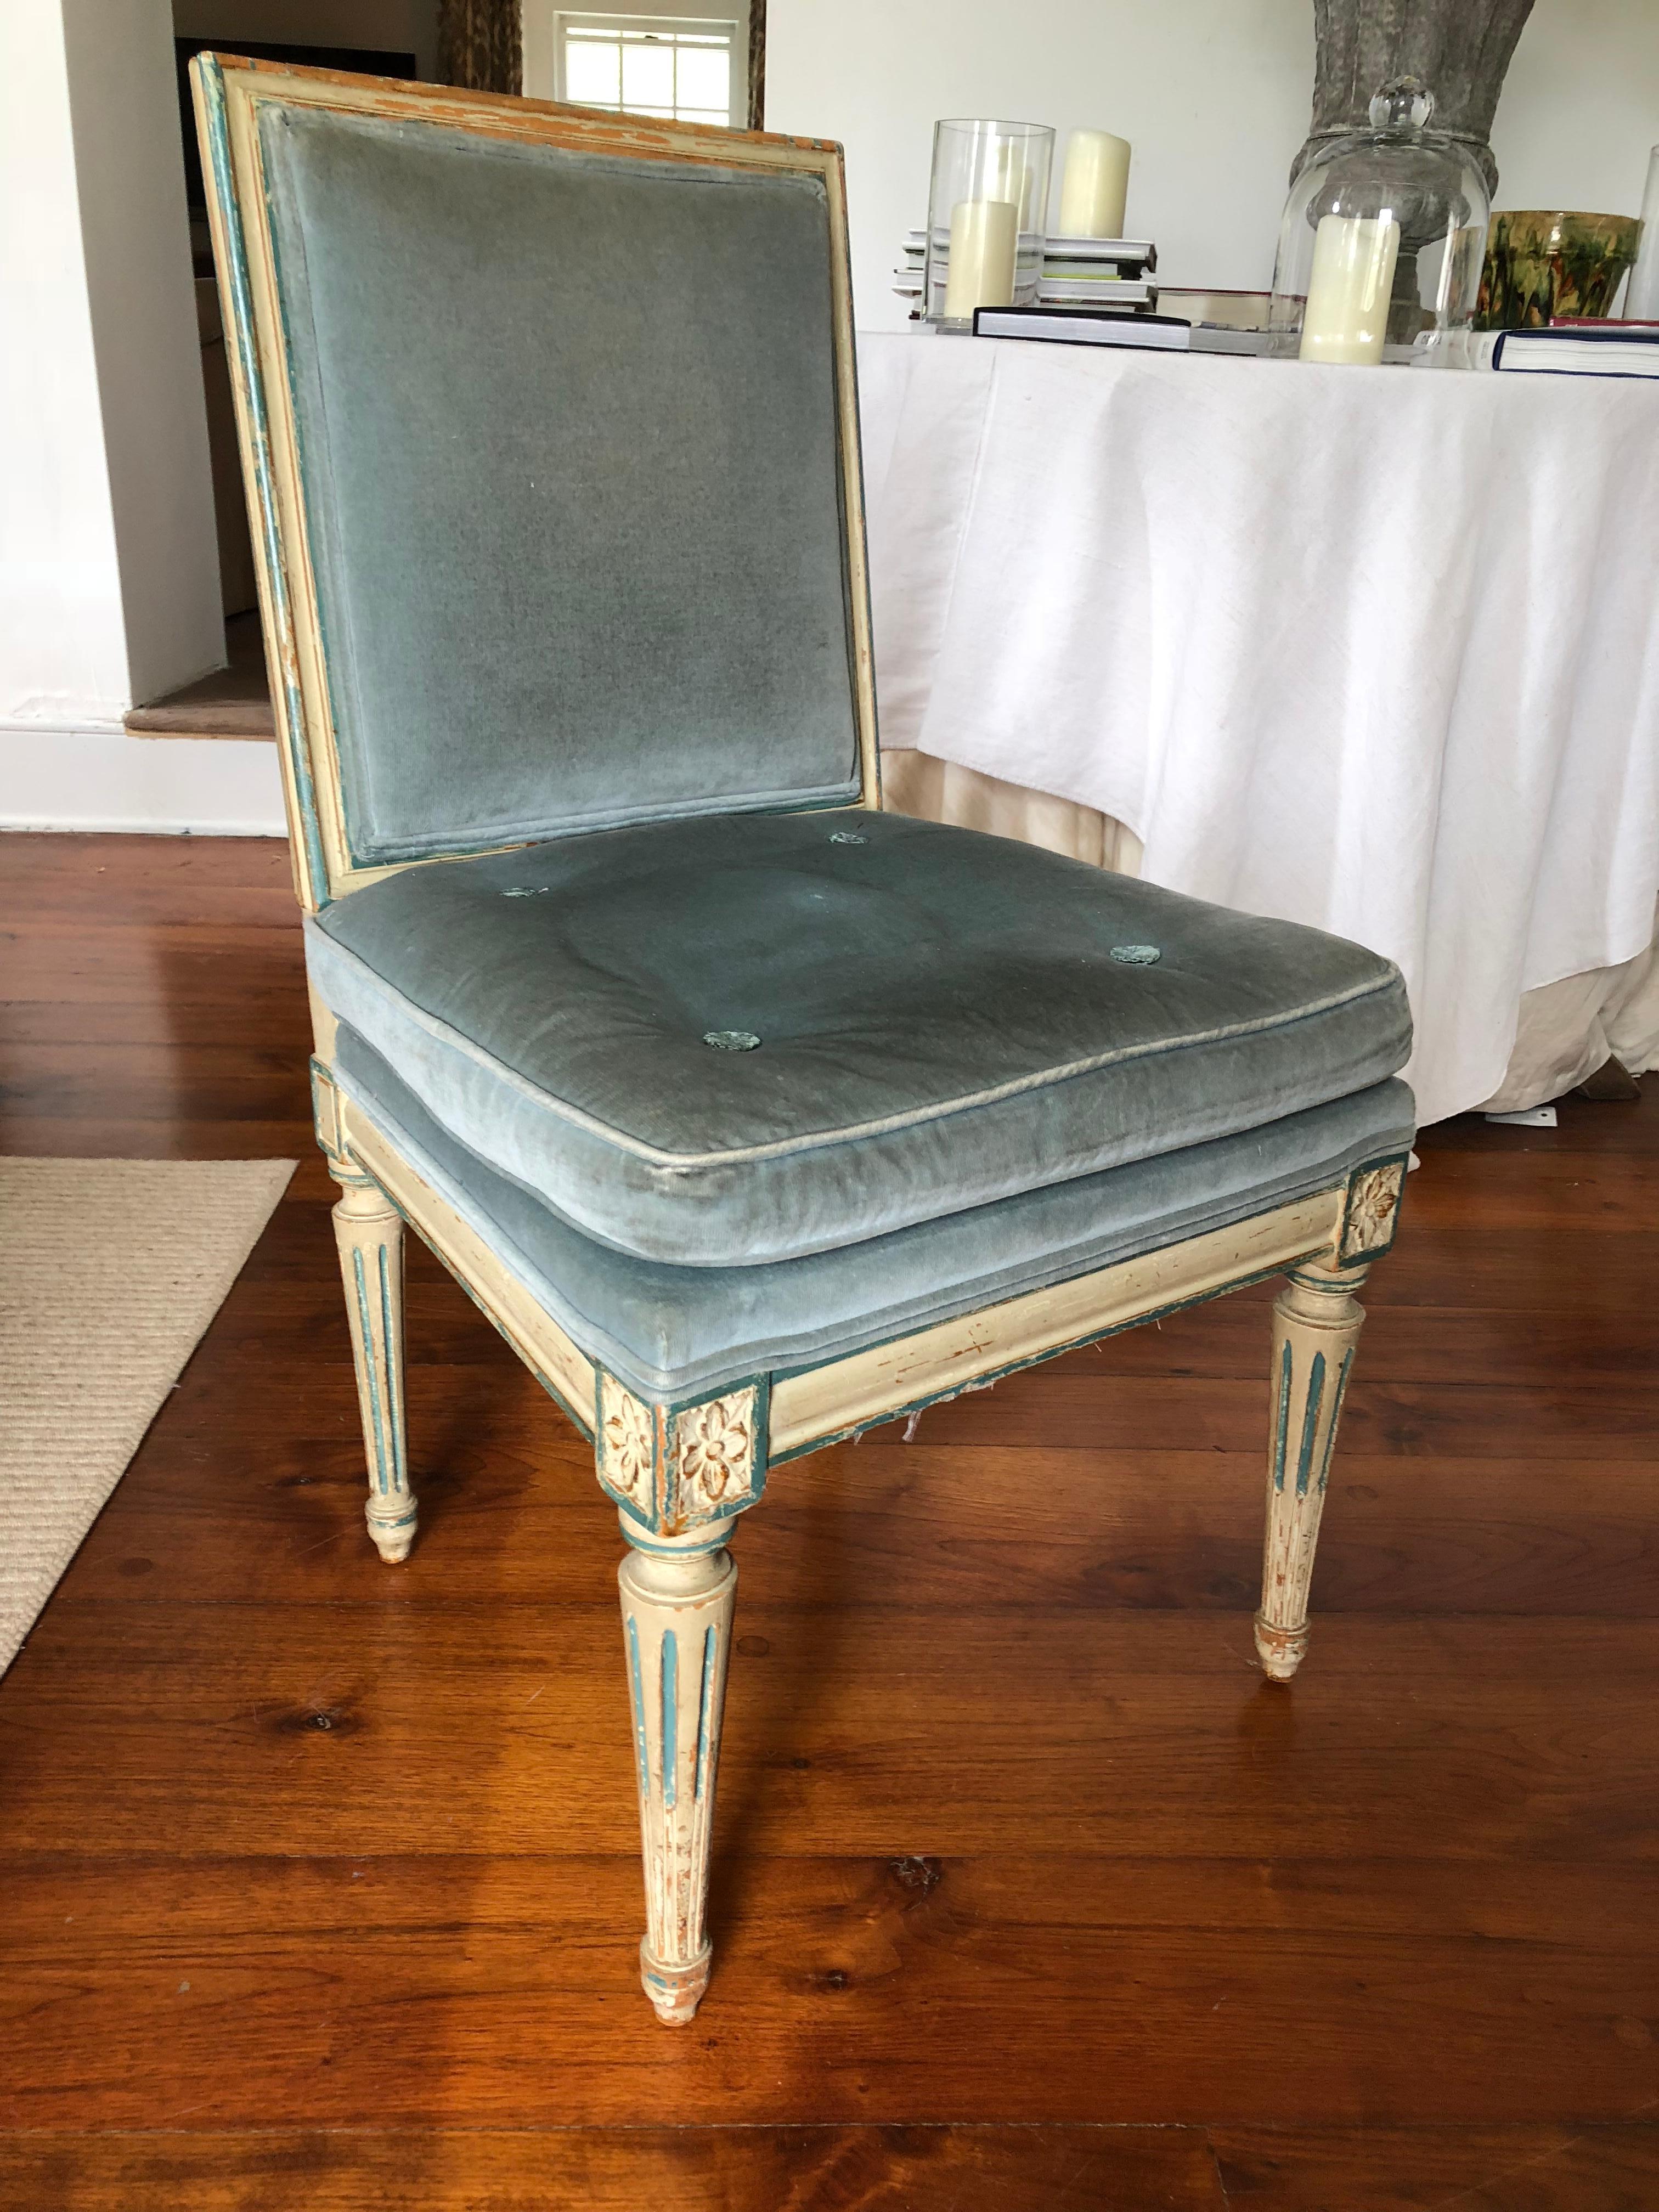 A French Louis XVI style side chair in old cream painted finish with blue trim, upholstered in old light blue velvet, circa 1890, with tapered and fluted legs.